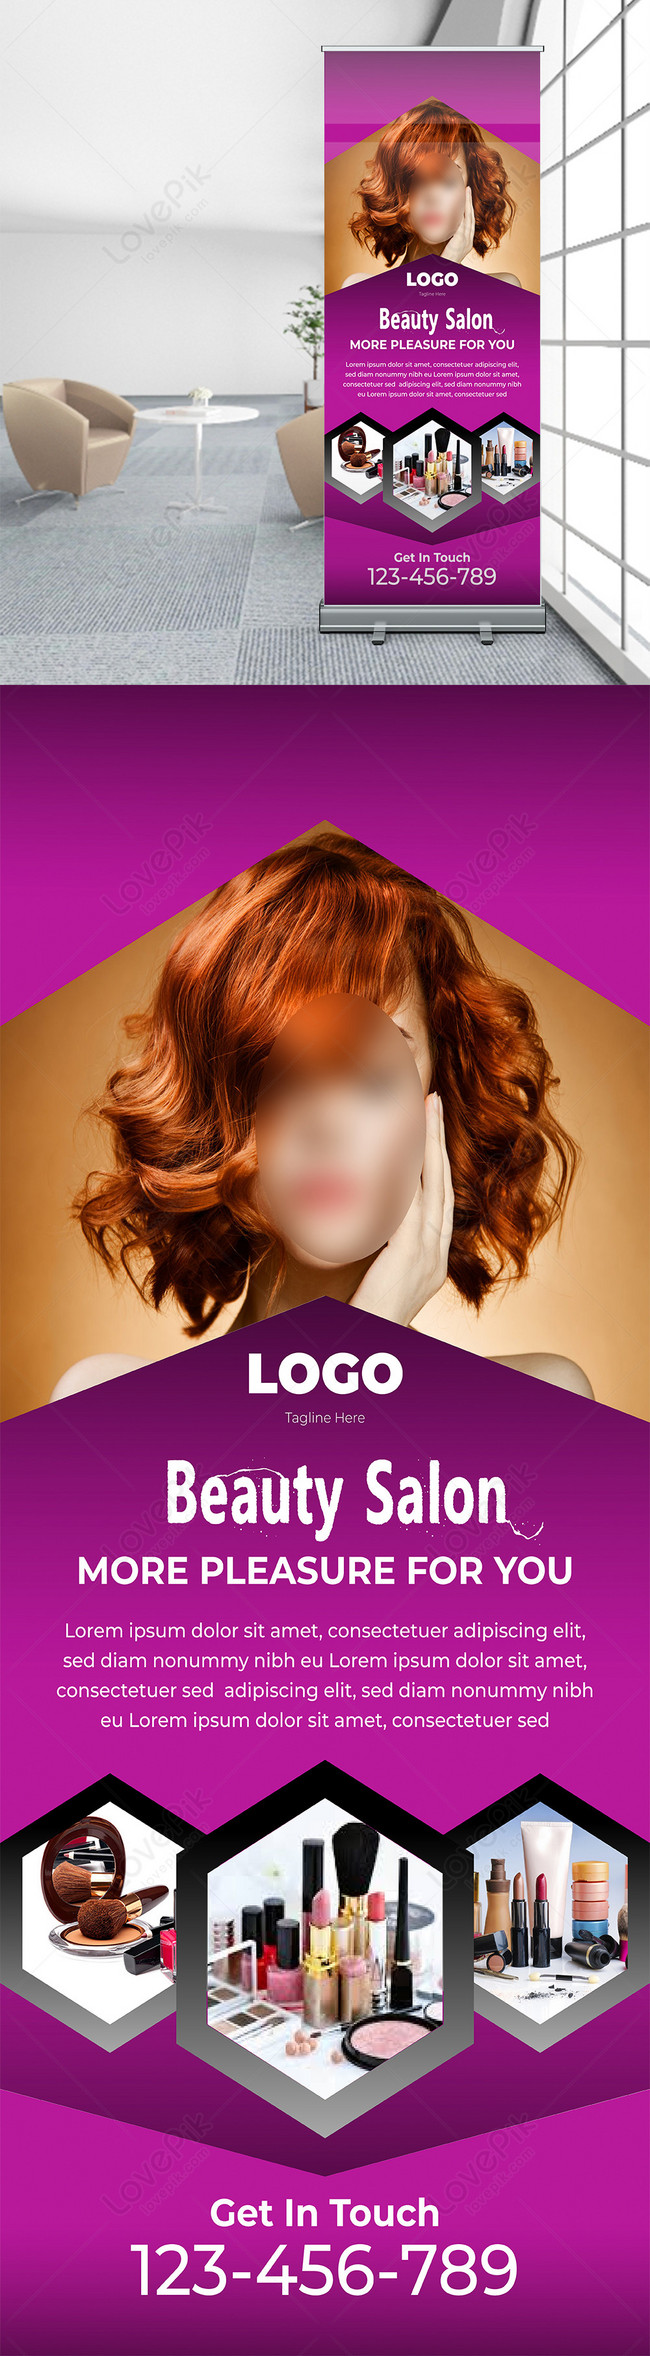 Stylish beauty salon rollup banner template image_picture free download  